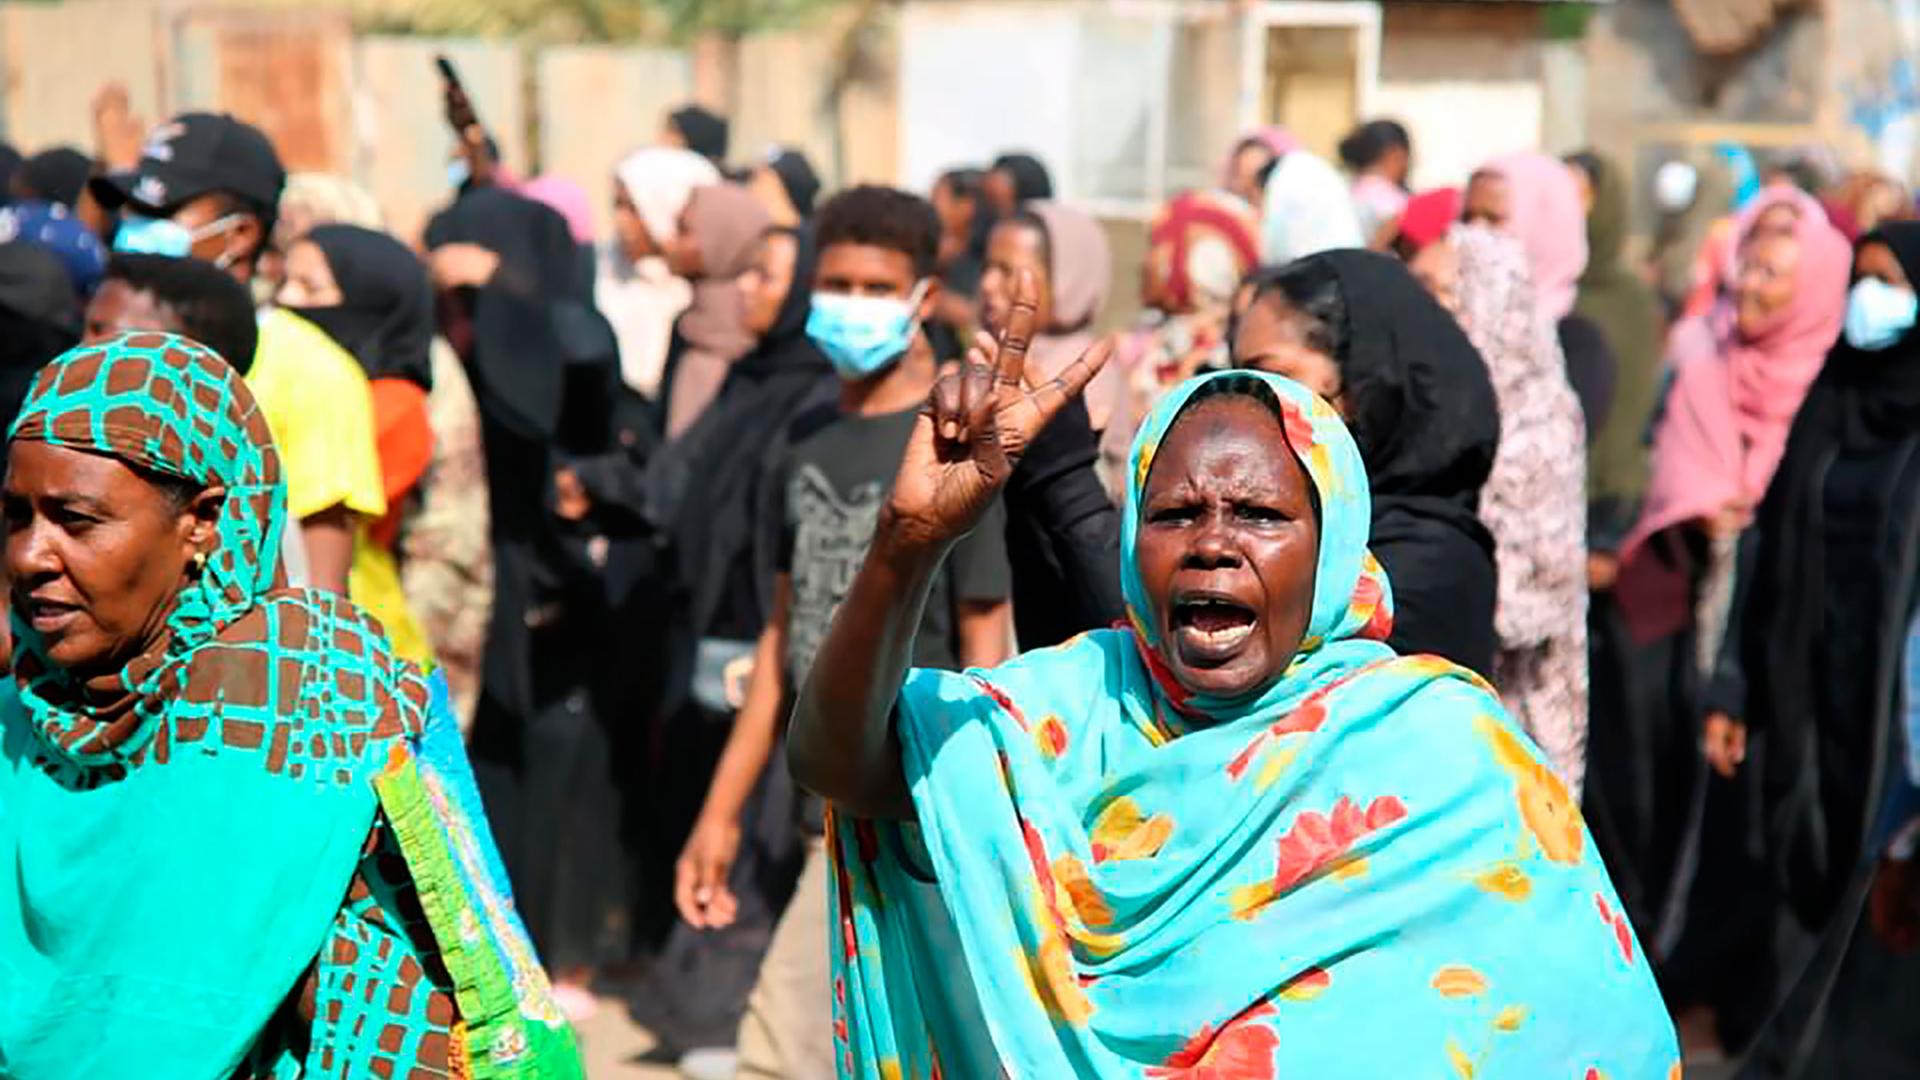 A pro-democracy protester wearing a turquoise blue scarf flashes the victory sign as thousands take to the streets to condemn a takeover by military officials, in Khartoum, Sudan, Oct. 25, 2021.